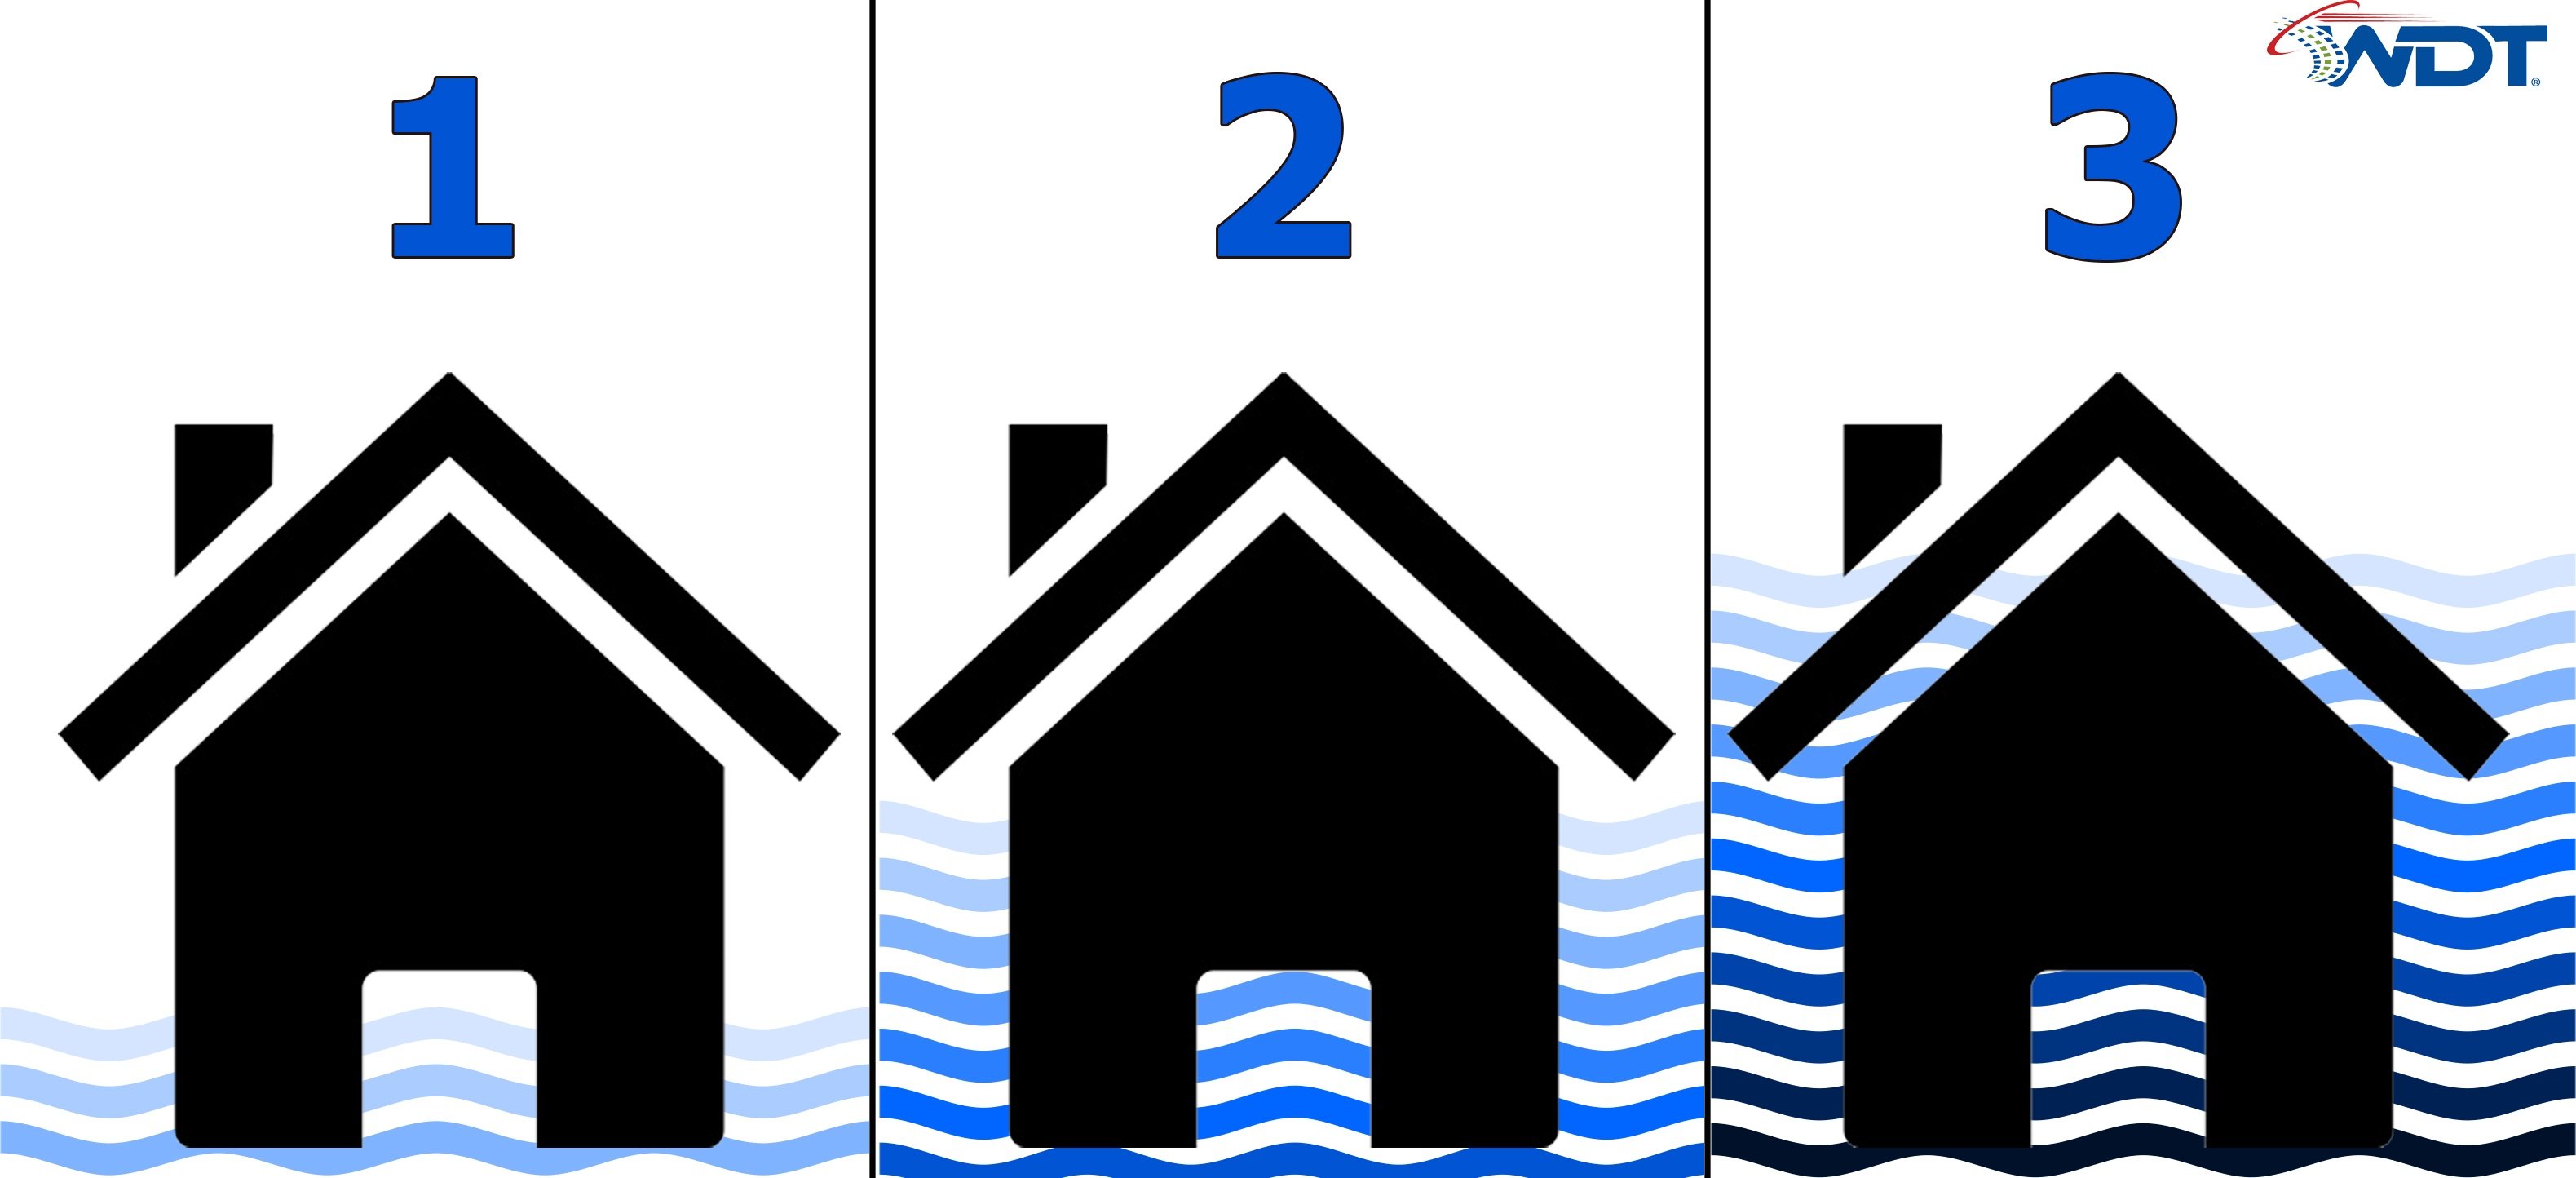 Do We Need a New Hurricane Rating Scale That Accounts for Flooding?